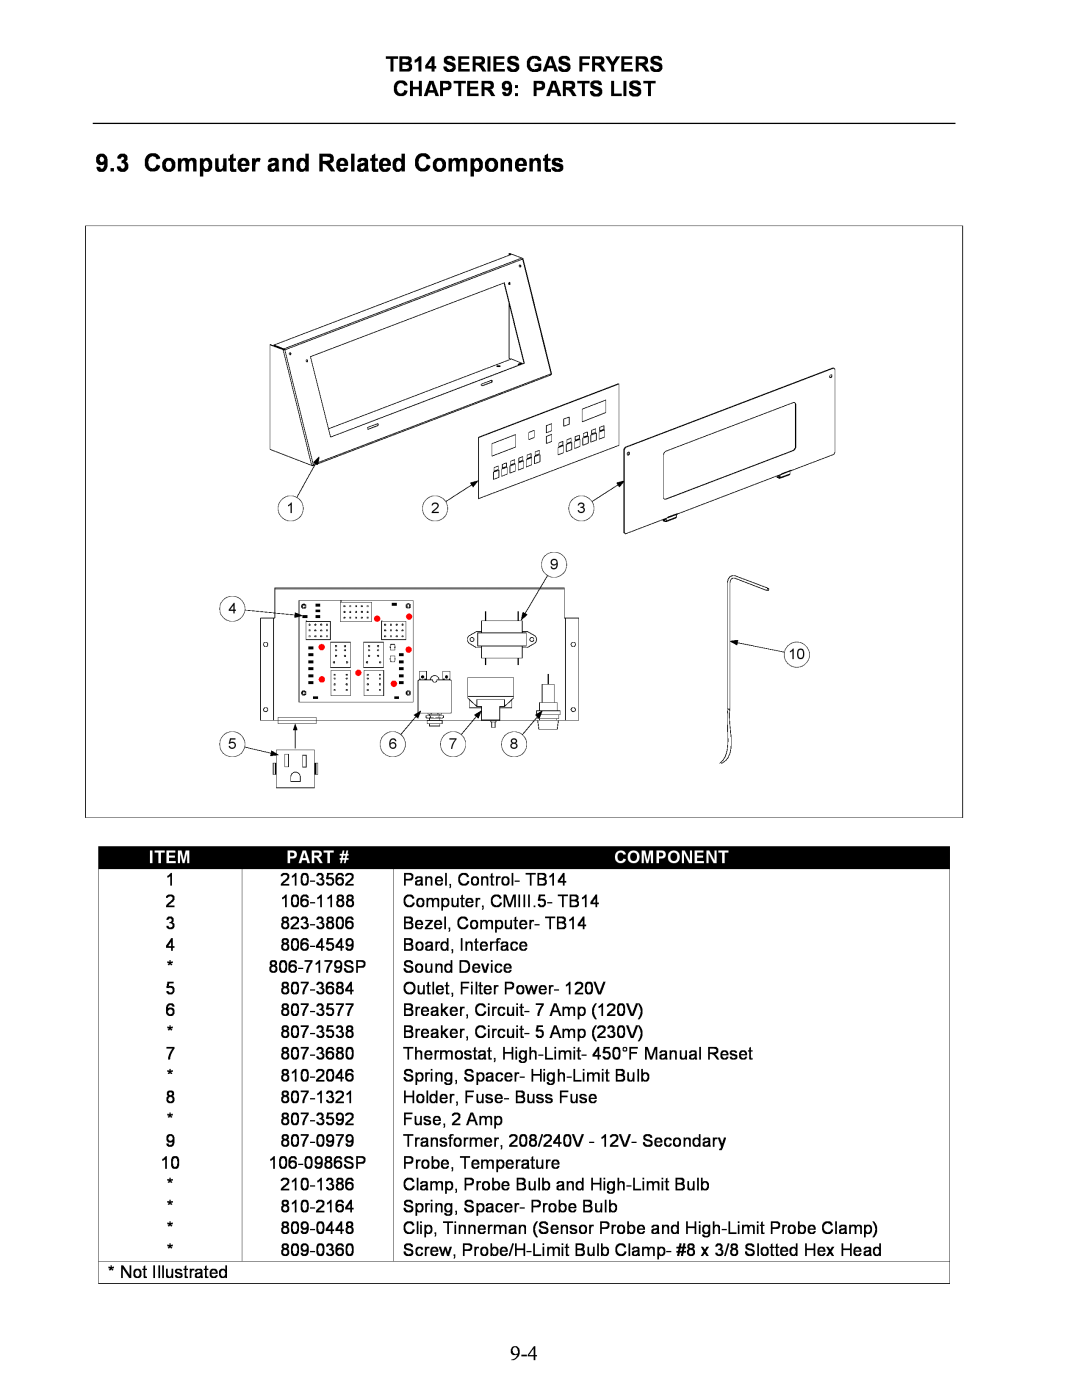 Frymaster operation manual Computer and Related Components, TB14 SERIES GAS FRYERS PARTS LIST, Part # 